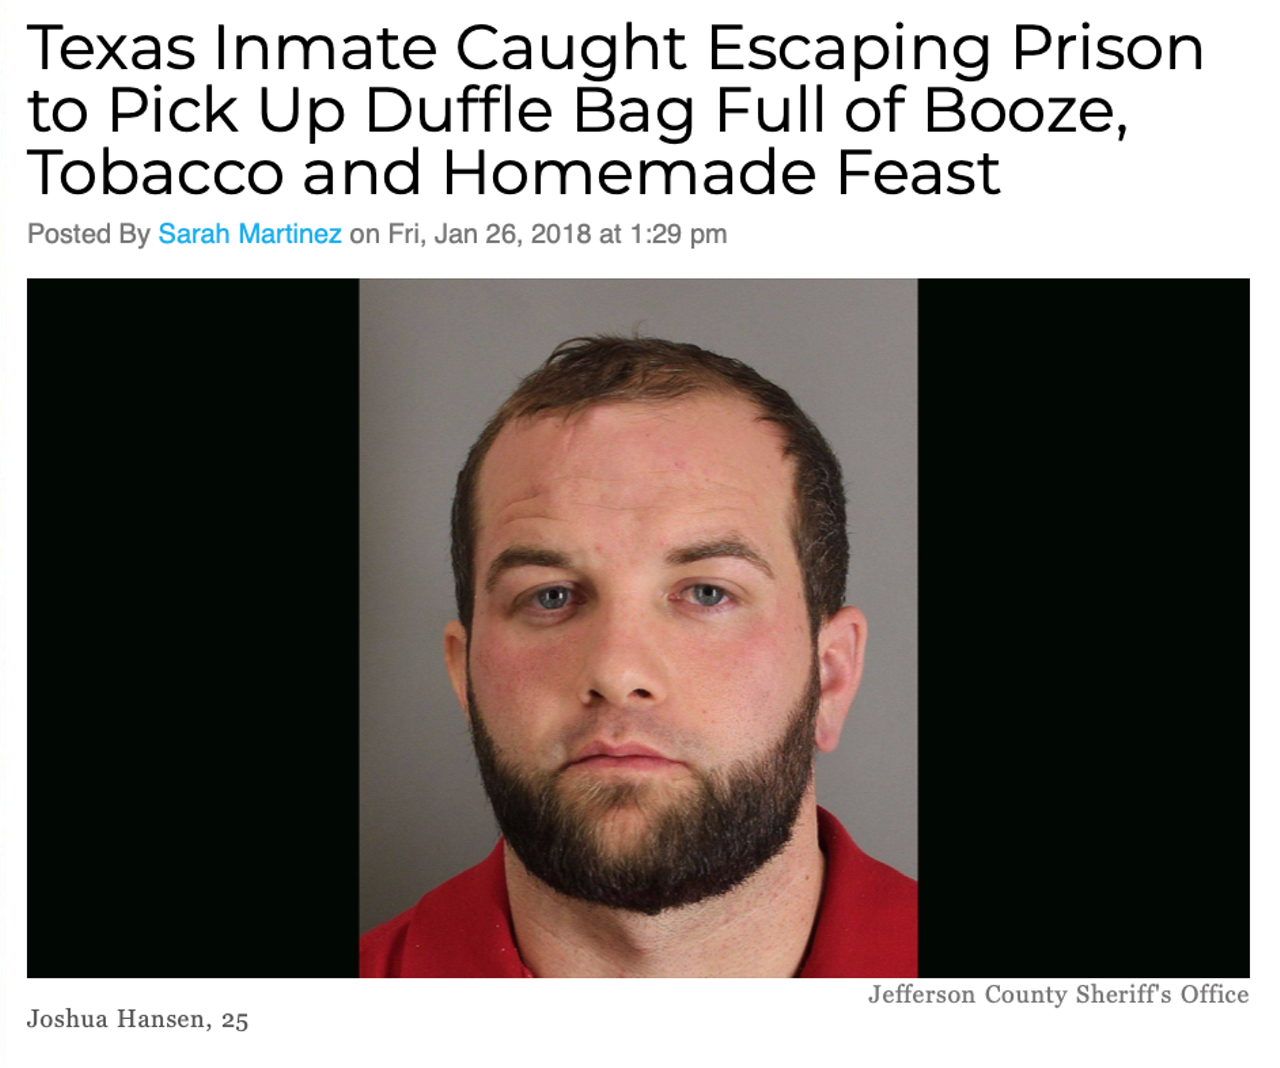 He got caught trying to sneak back into the prison. Read more.